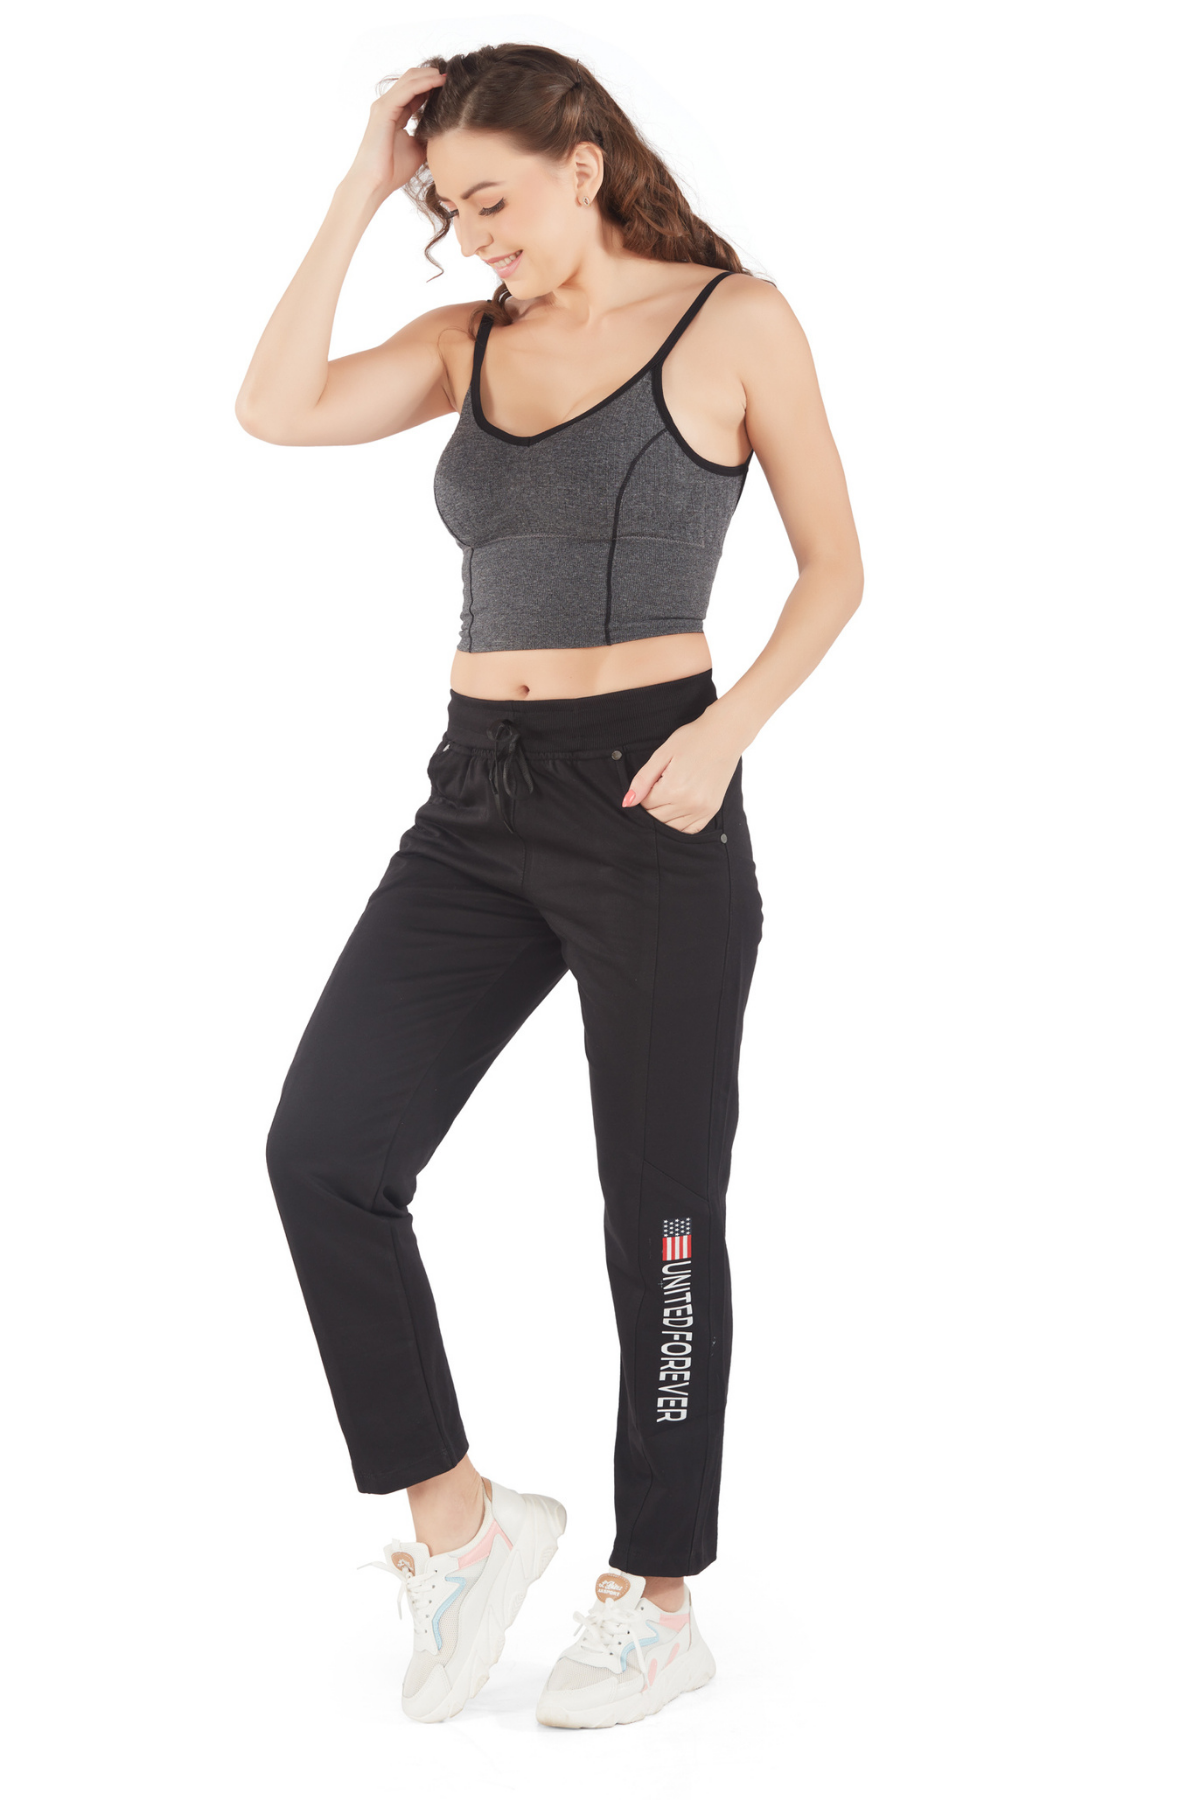 Comfy Black Regular Fit Cotton Lounge Track pants for Women online in India at best prices